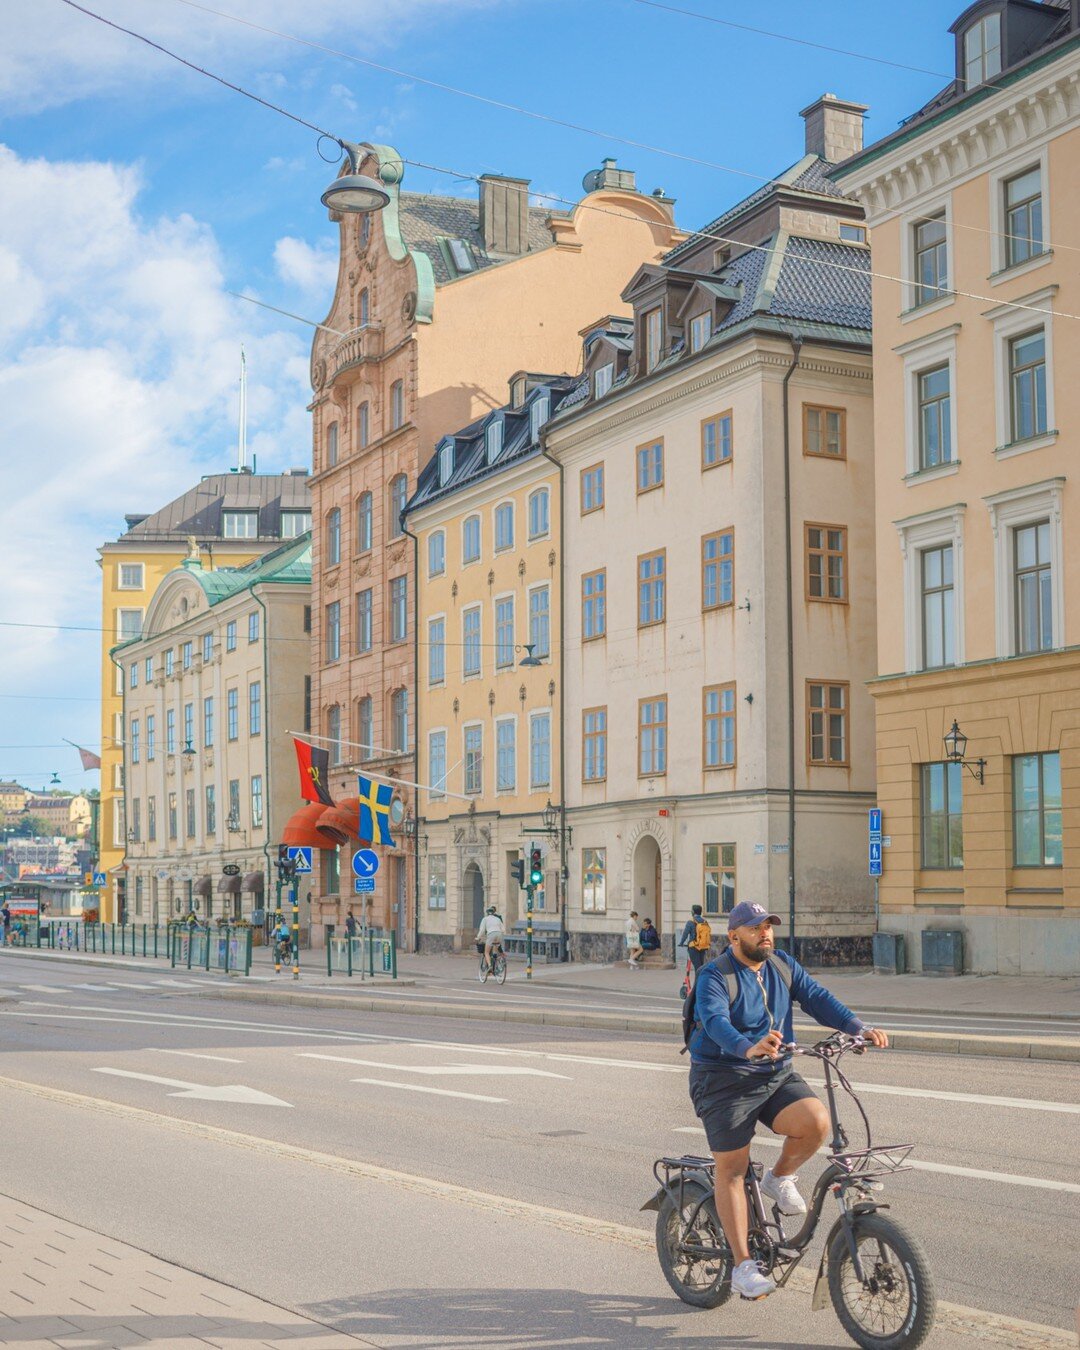 Such a brilliant time of year to be in Stockholm. So many people are away and it's just the tourists playing fun and games in the city. Stockholm's buildings really come to life at this time of year though. In the summer light they look spectacular.